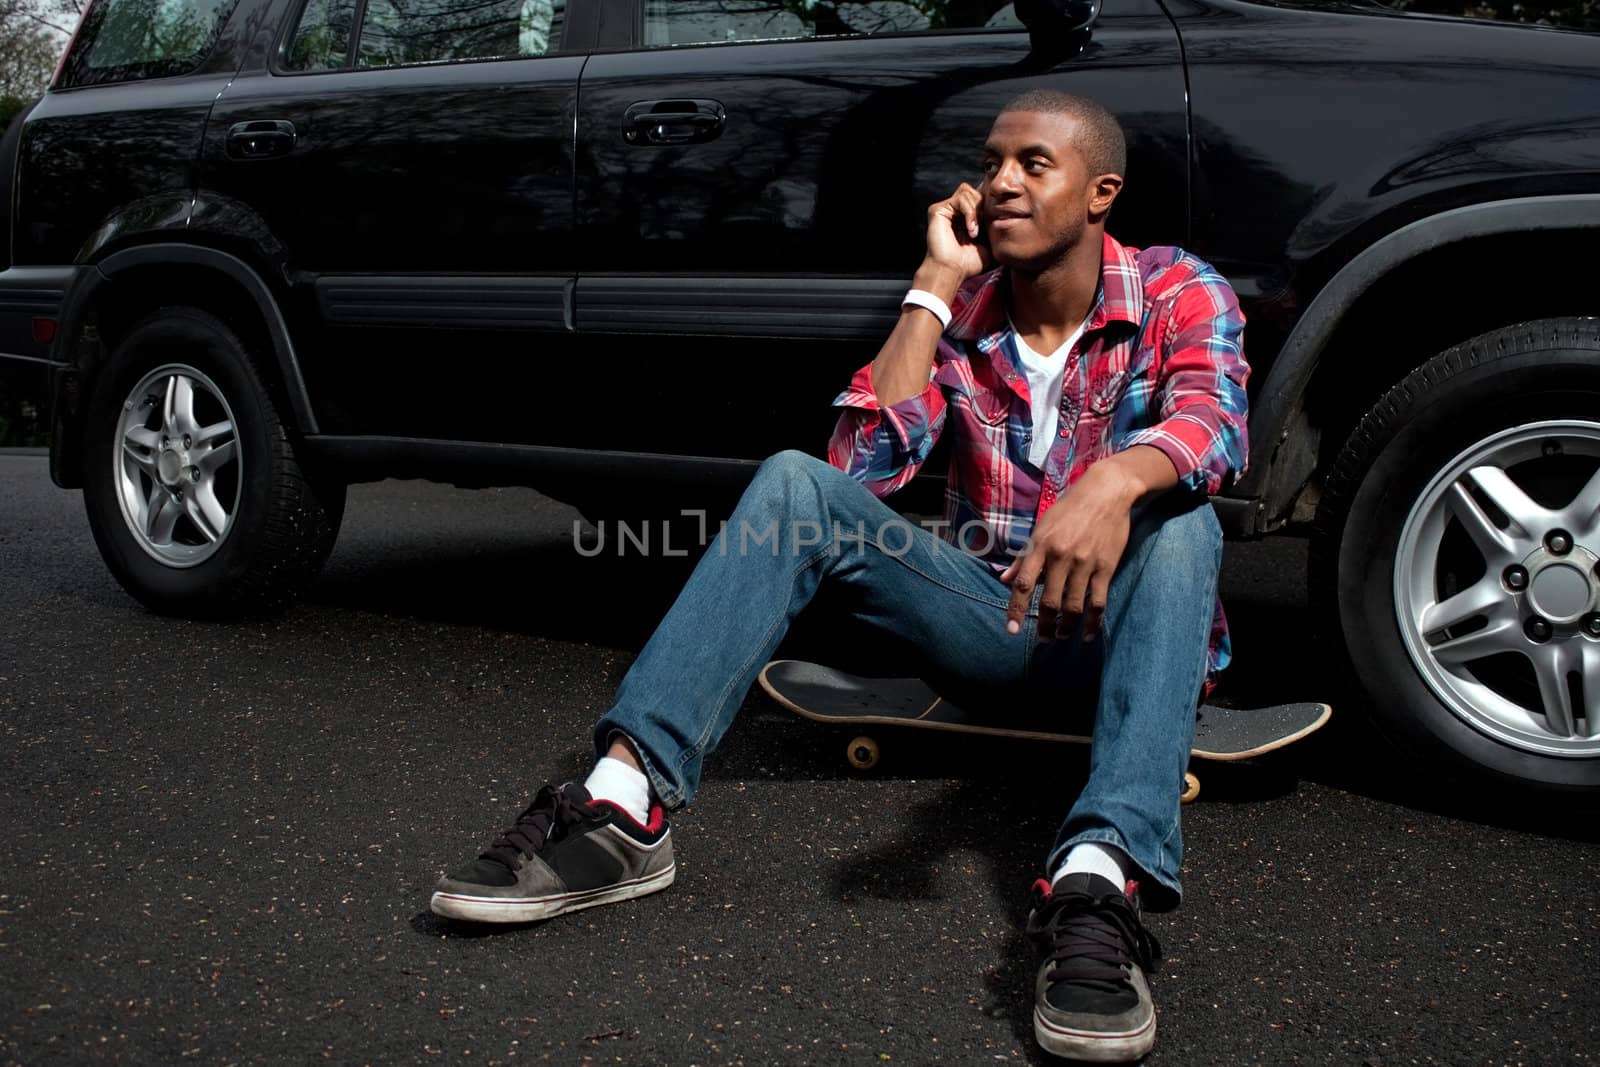 A young man hanging out sitting on his skateboard near his vehicle as he talks on his smartphone.